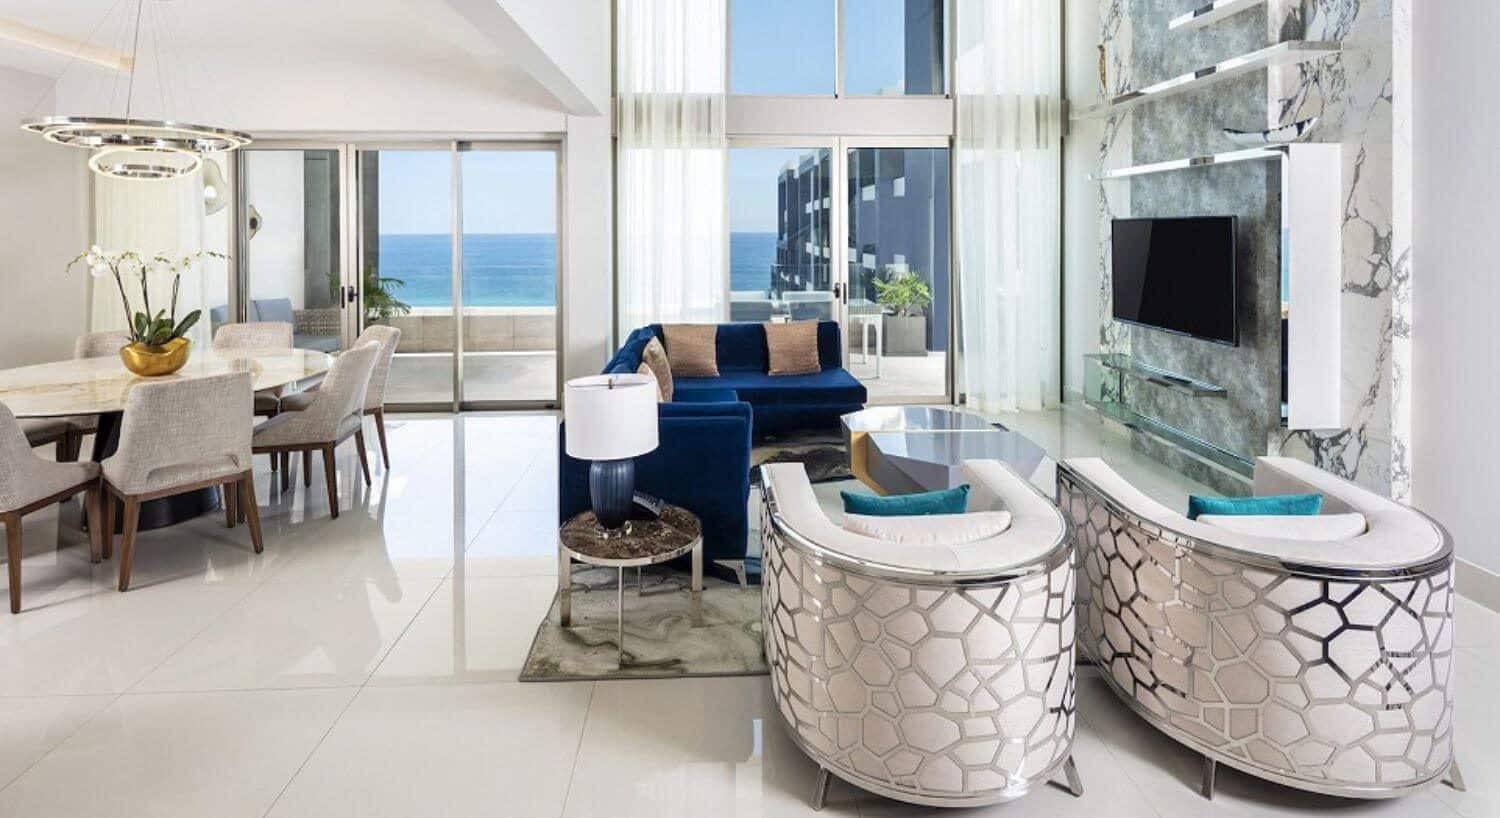 A large open floor plan living room and dining area with blue sofas, plush white armchairs, nightstands with lamps, a flat screen TV, a round dining table and 8 chairs, and sliding doors leading out to a private balcony with patio furniture and ocean views.